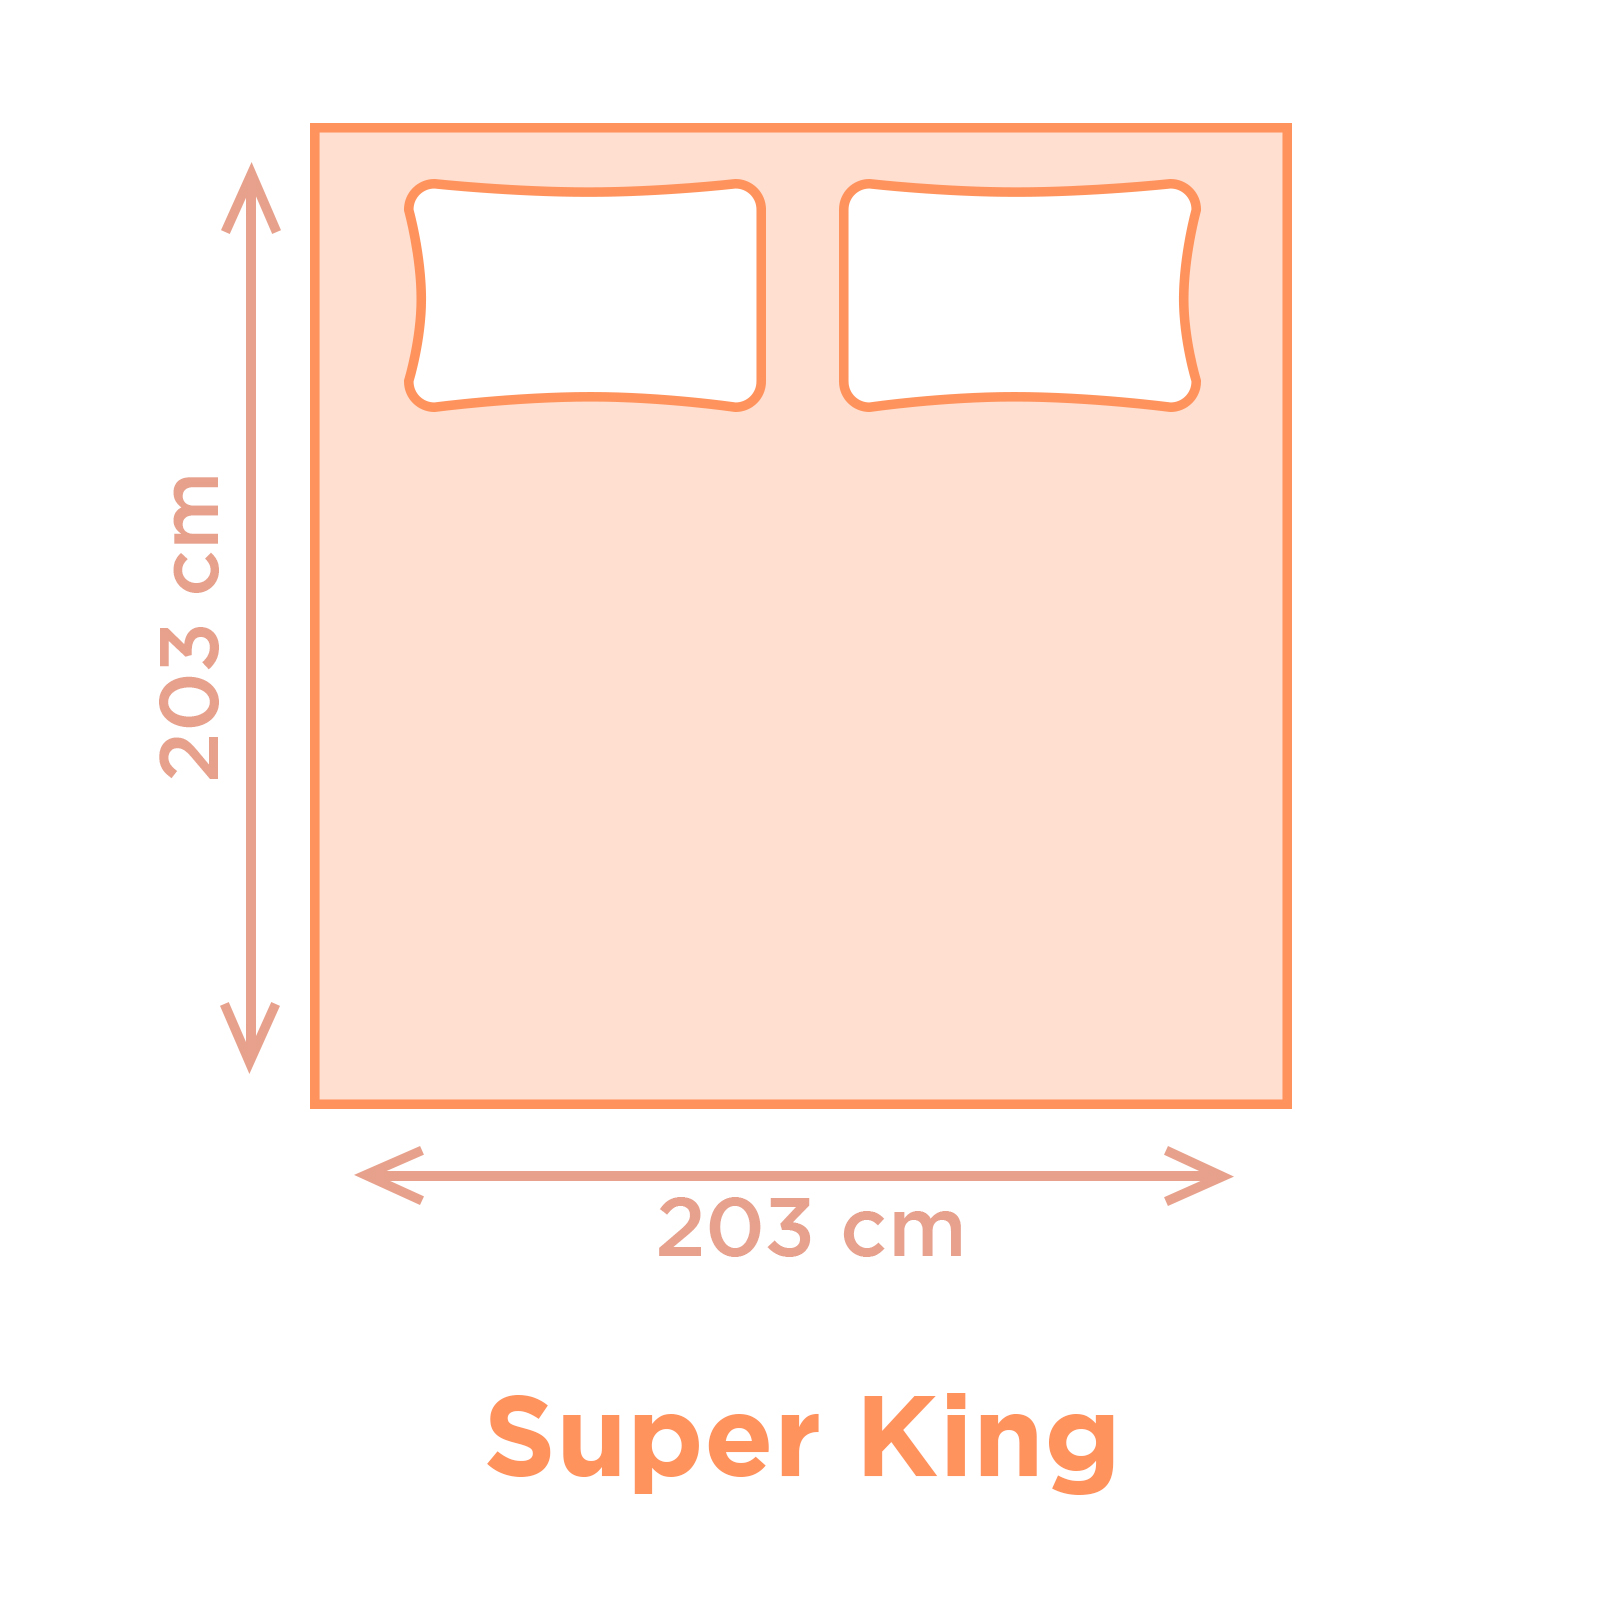 king size bed dimensions in feet - Google Search